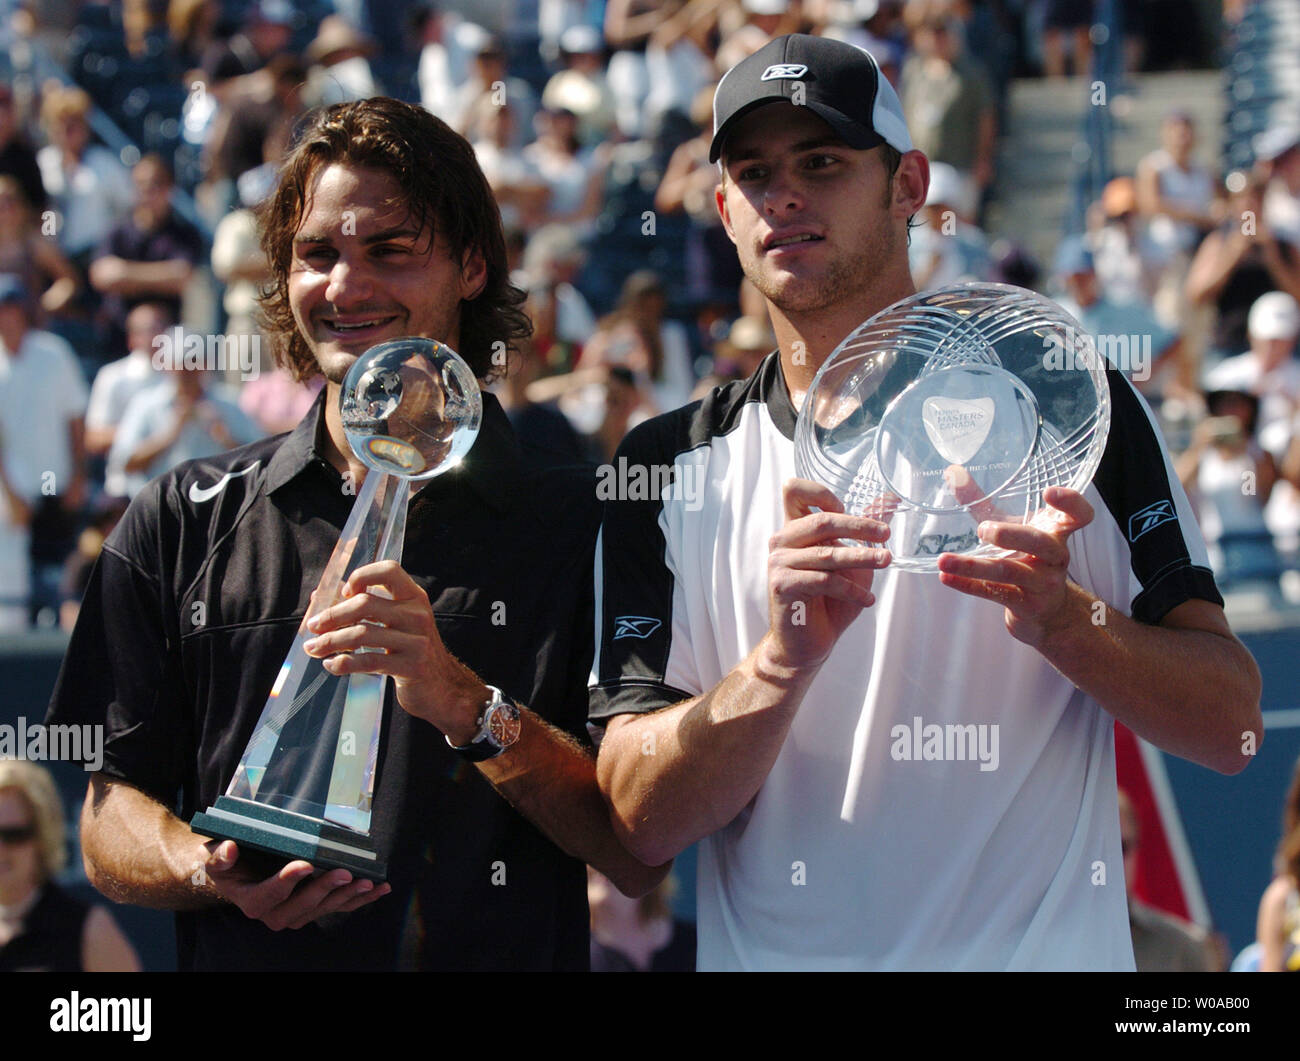 Top seed Roger Federer of Switzerland and Andy Roddick pose with their  trophies after the Tennis Masters Canada singles final at the Rexall Center  August 1, 2004 in Toronto, Canada. Federer won